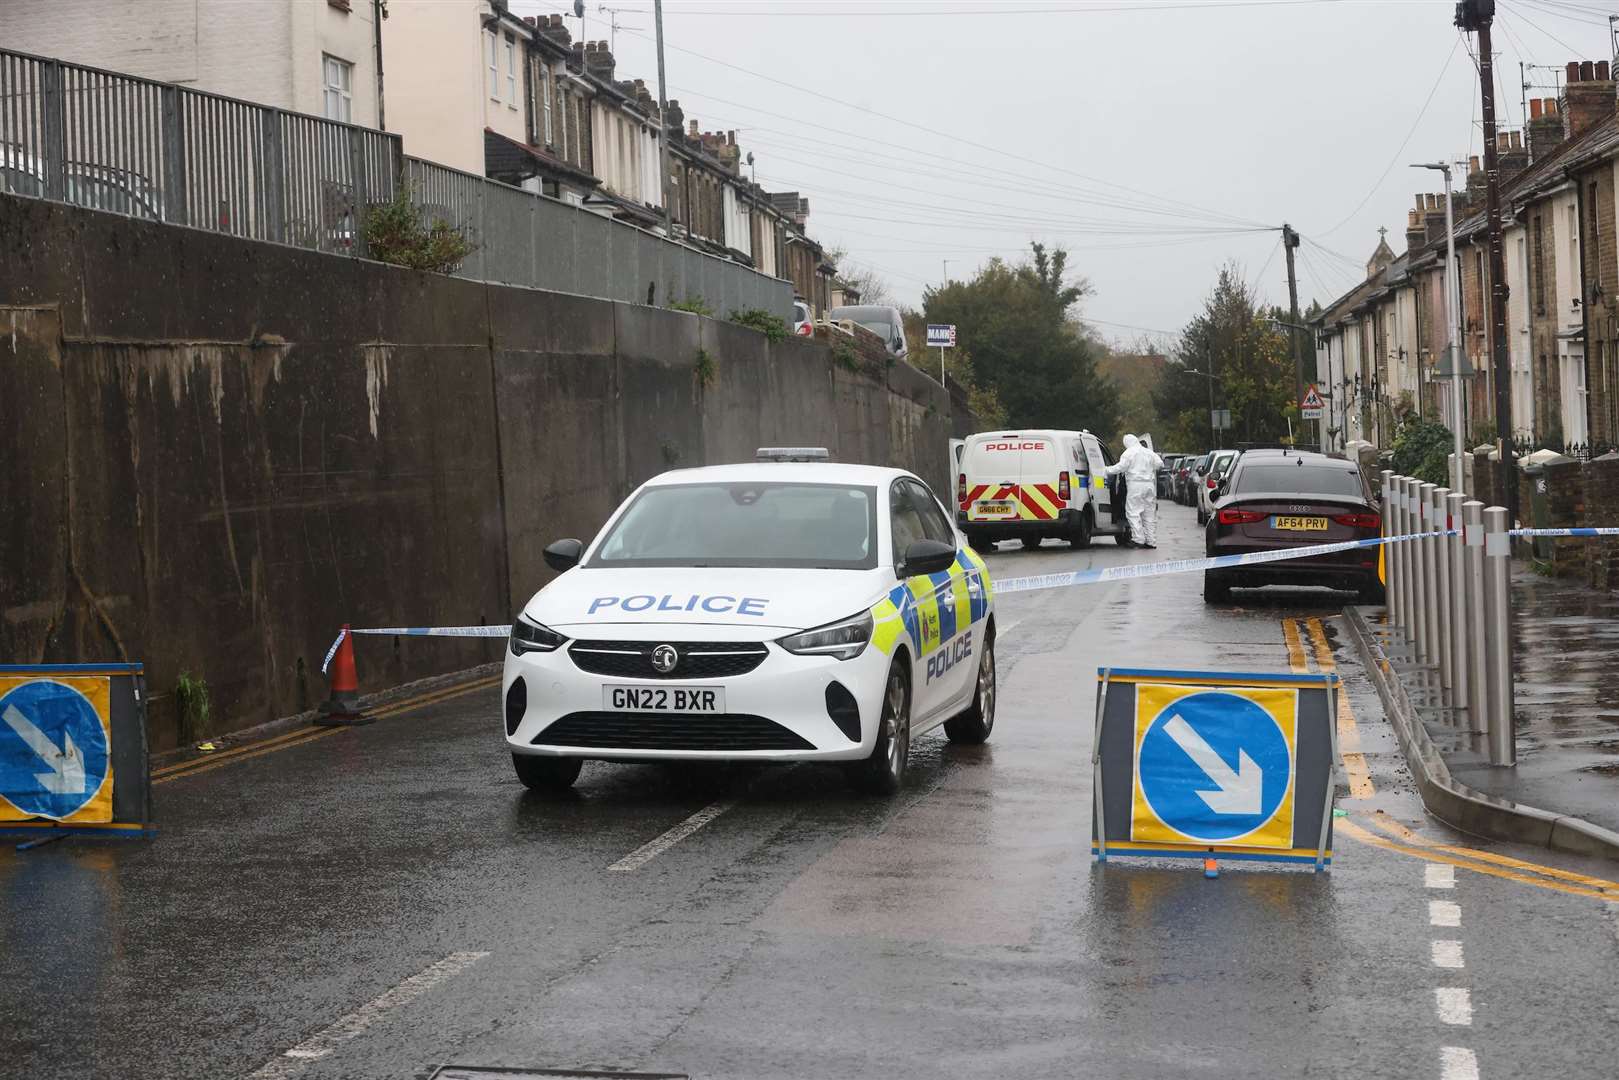 Forensic officers at the scene of a serious assault in Borstal Street, Borstal